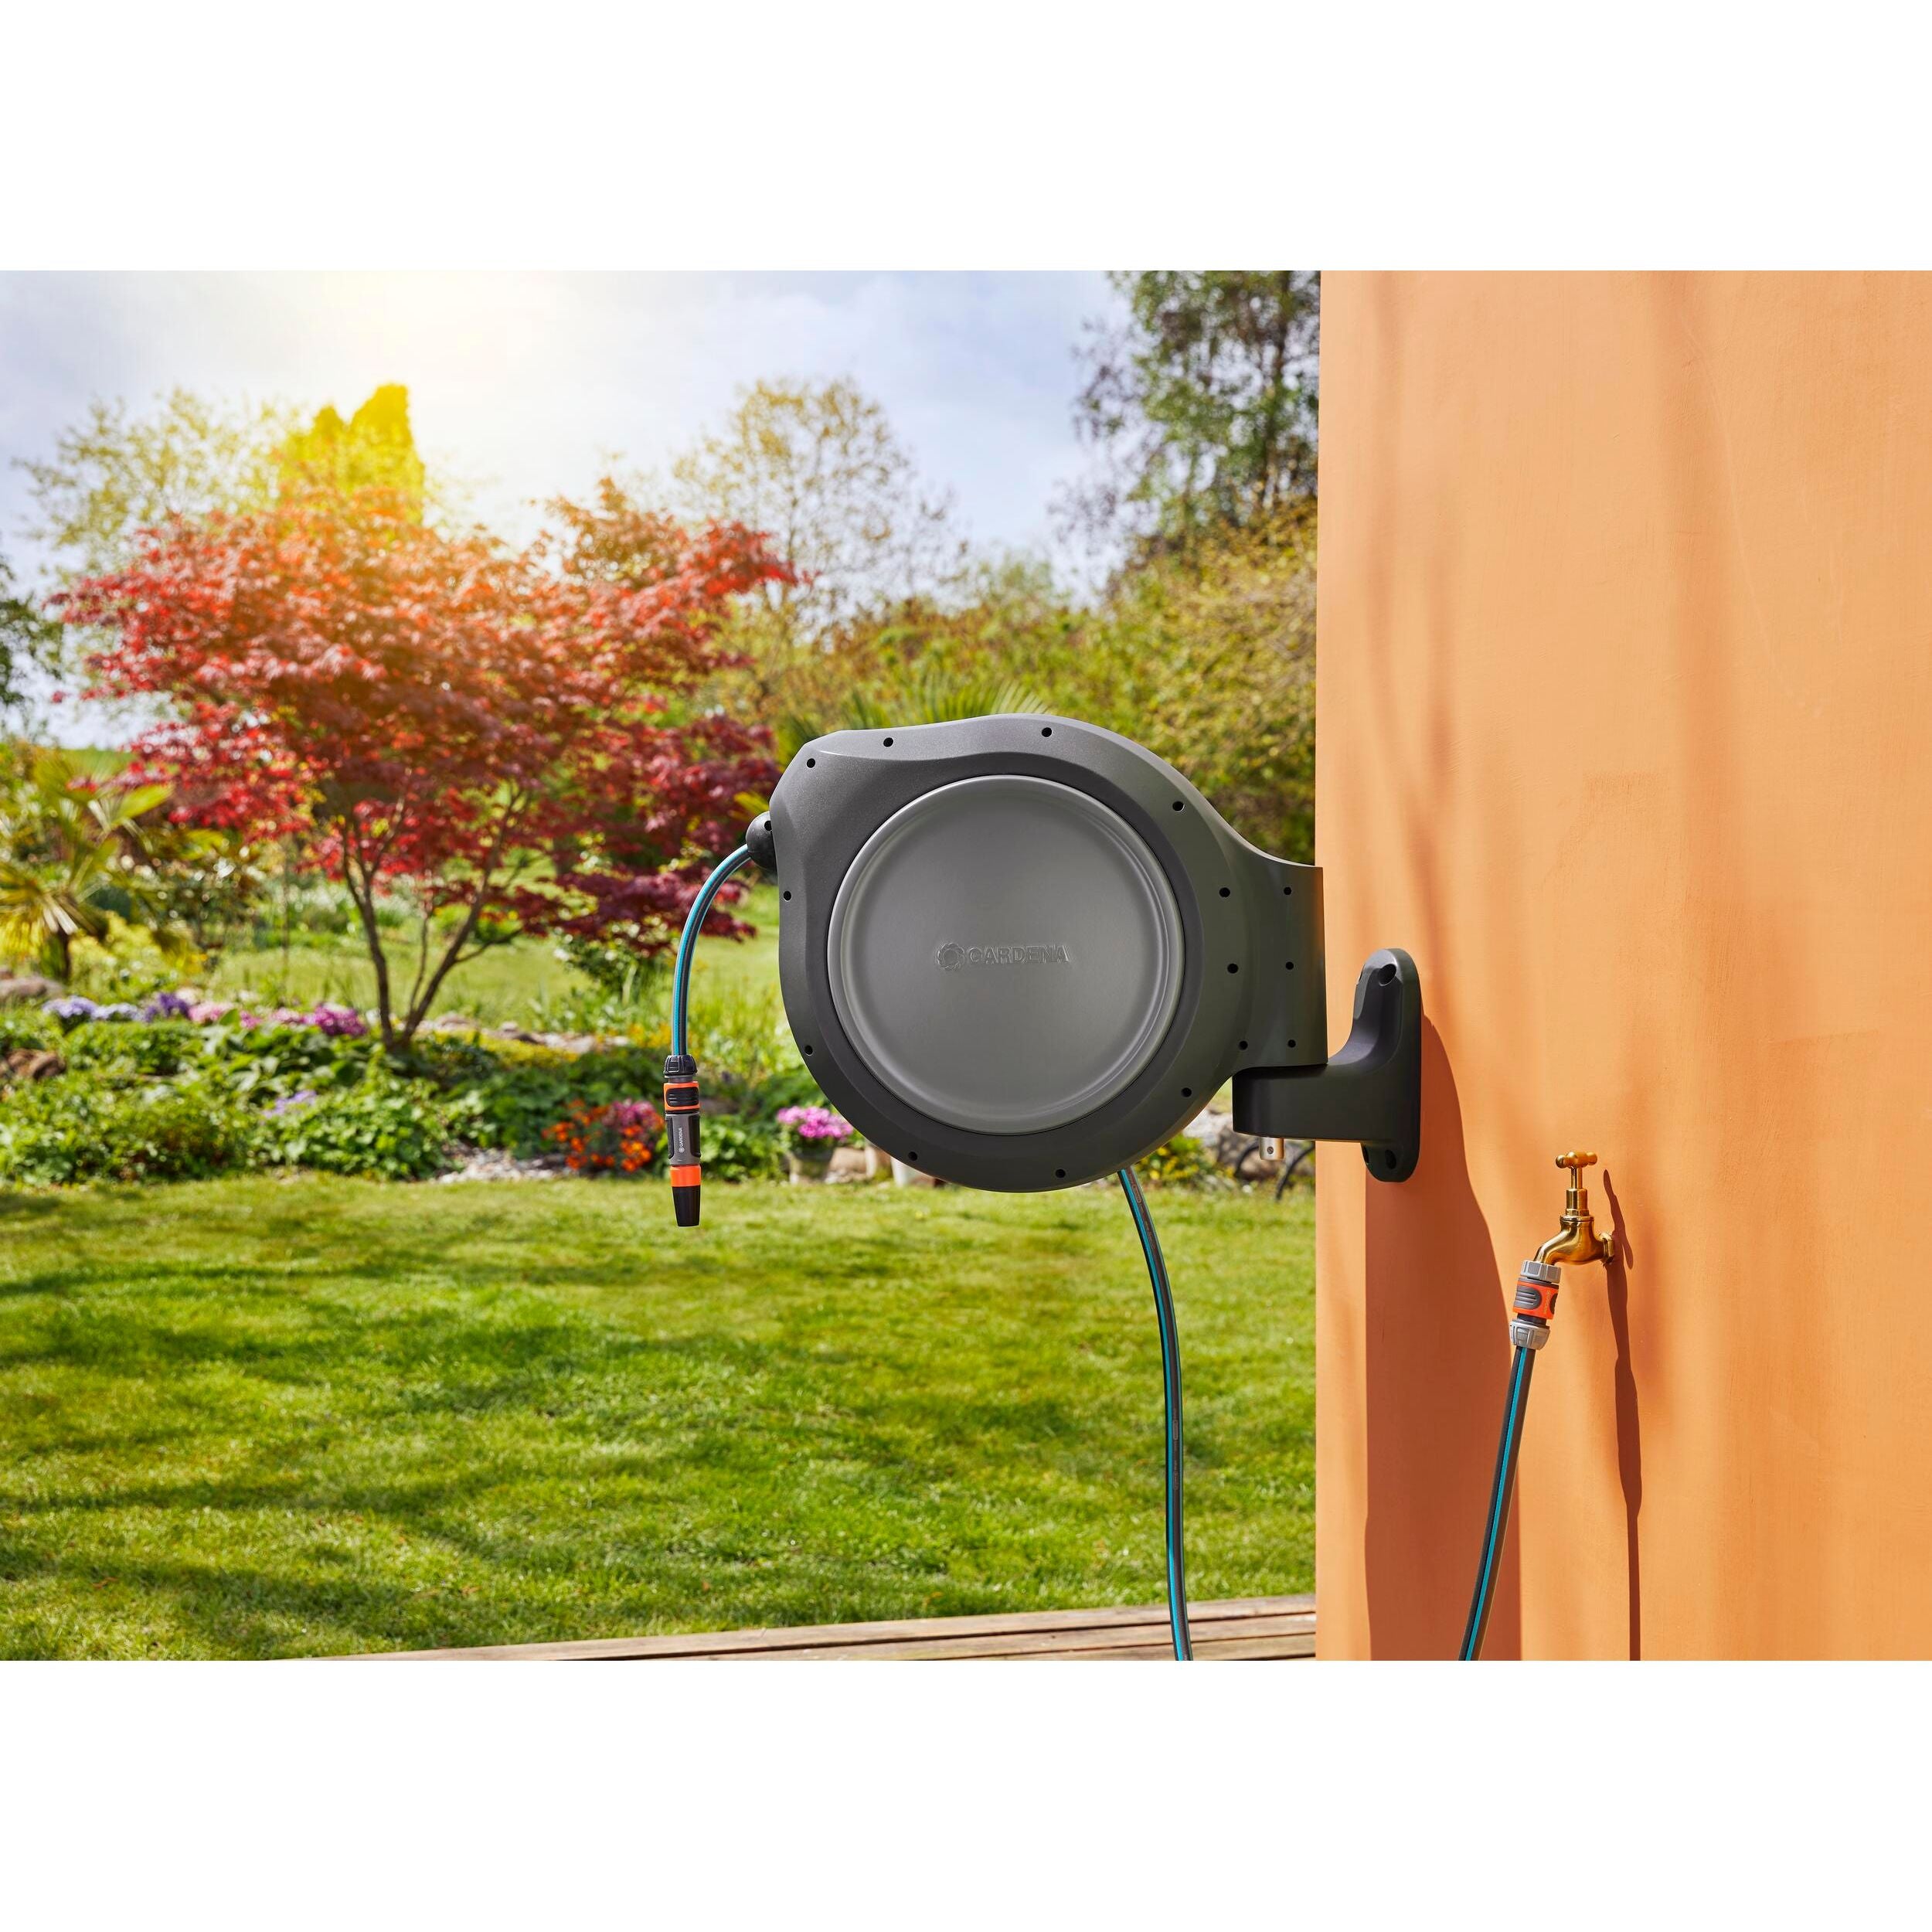 Gardena Wall-Mounted Hose Box RollUp S - Interismo Online Shop Global